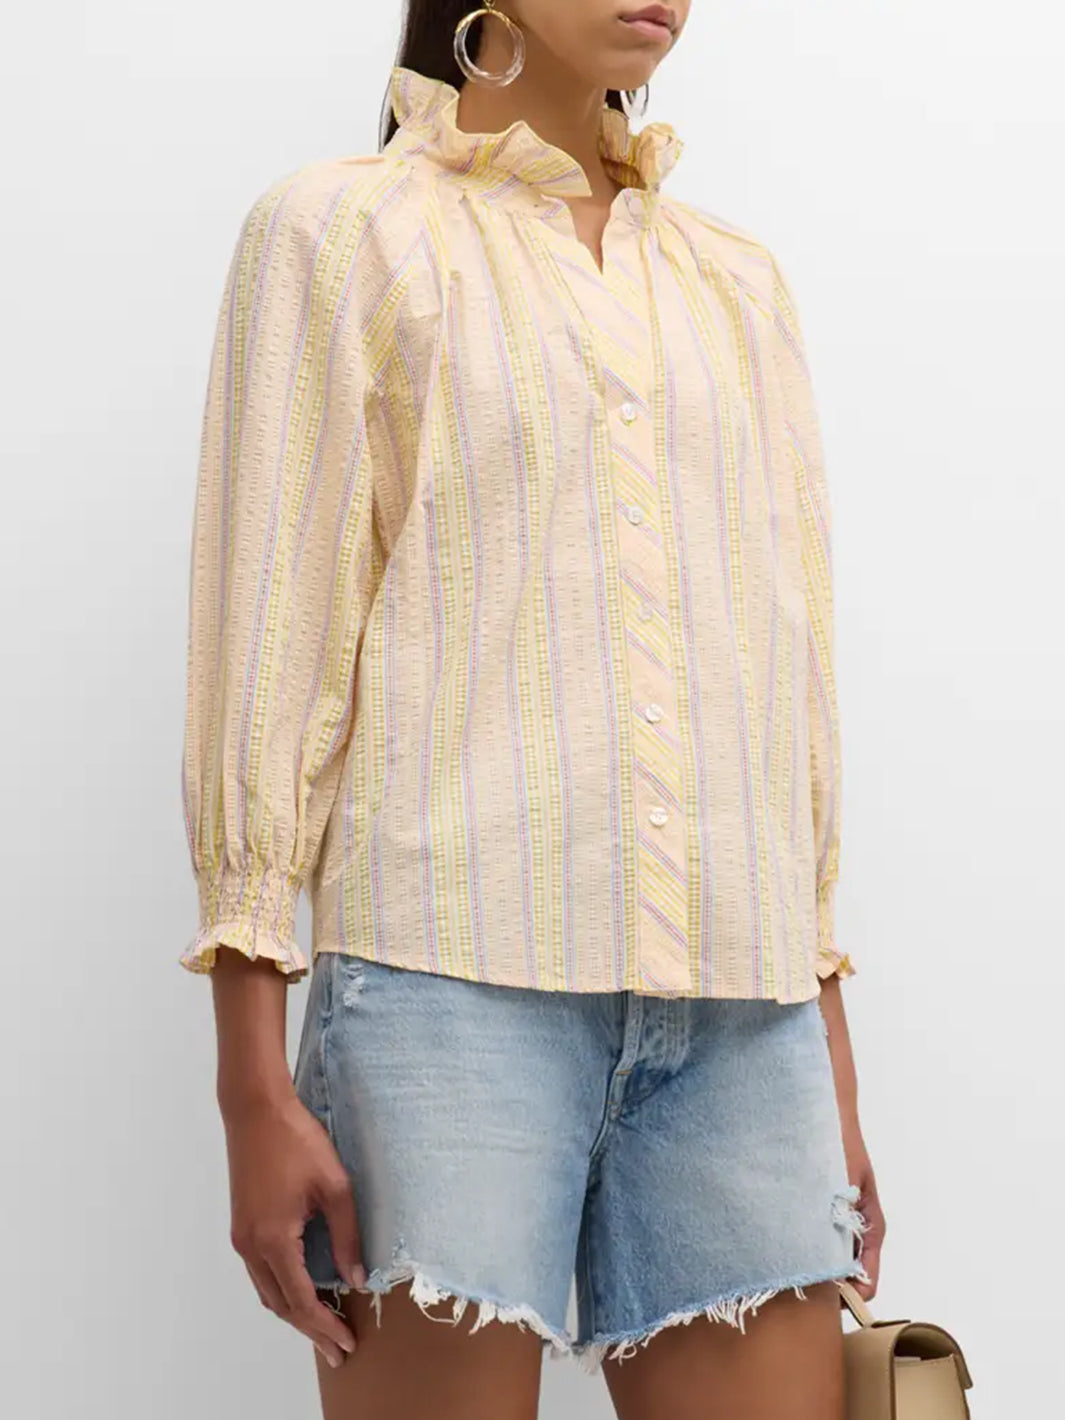 Fiona Cotton Shirt in White and Blue Stripe